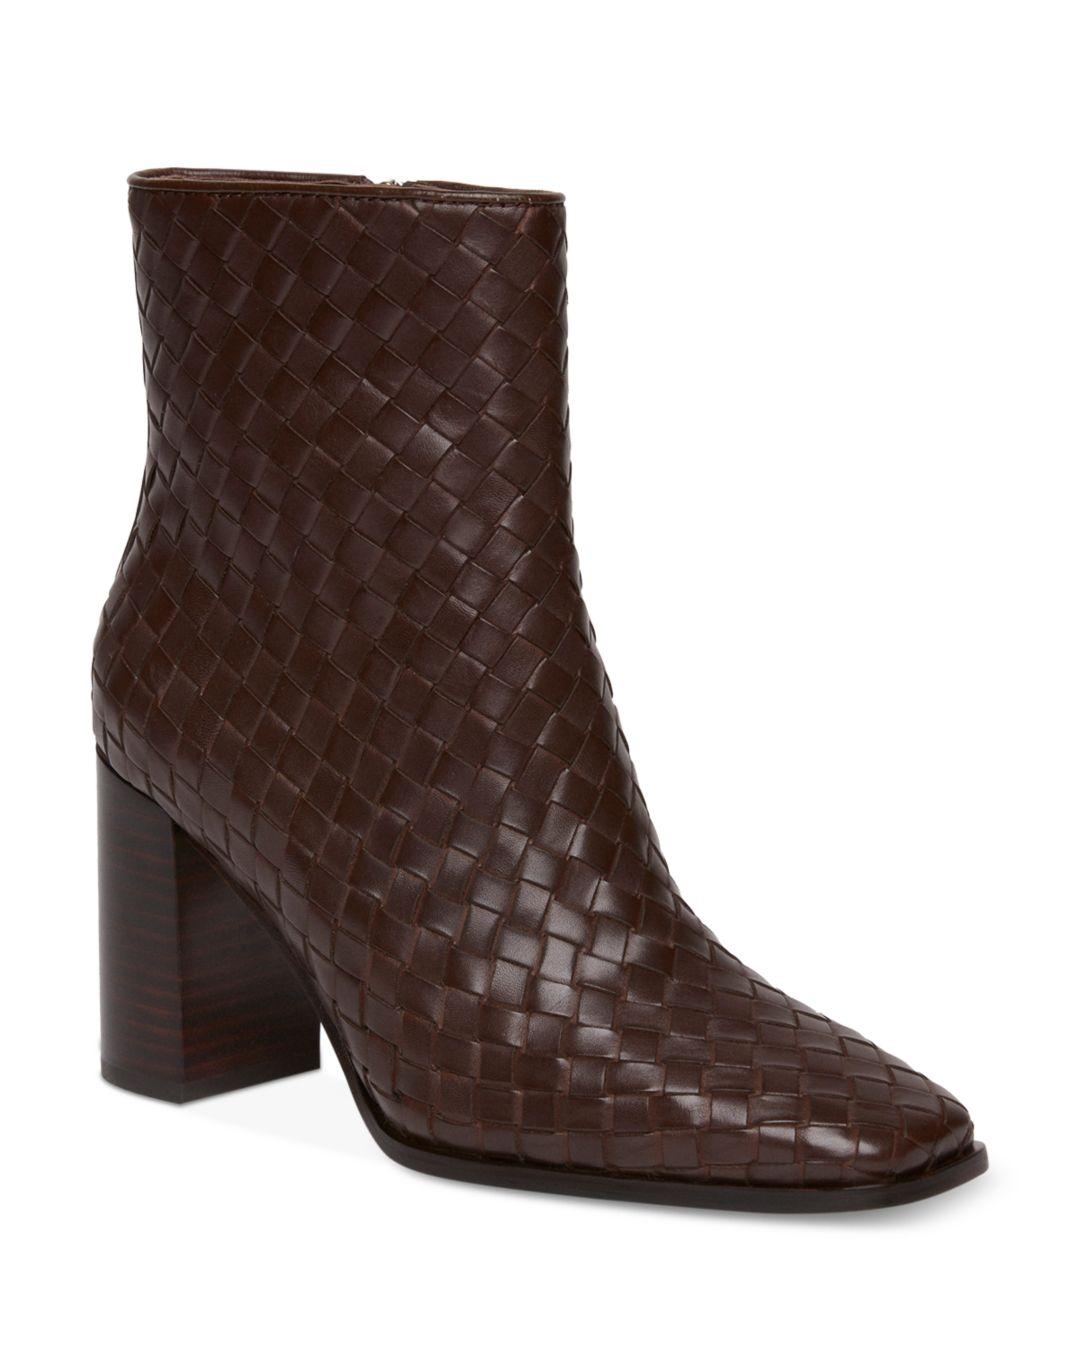 PAIGE Frances Woven High Heel Ankle Boots in Brown | Lyst